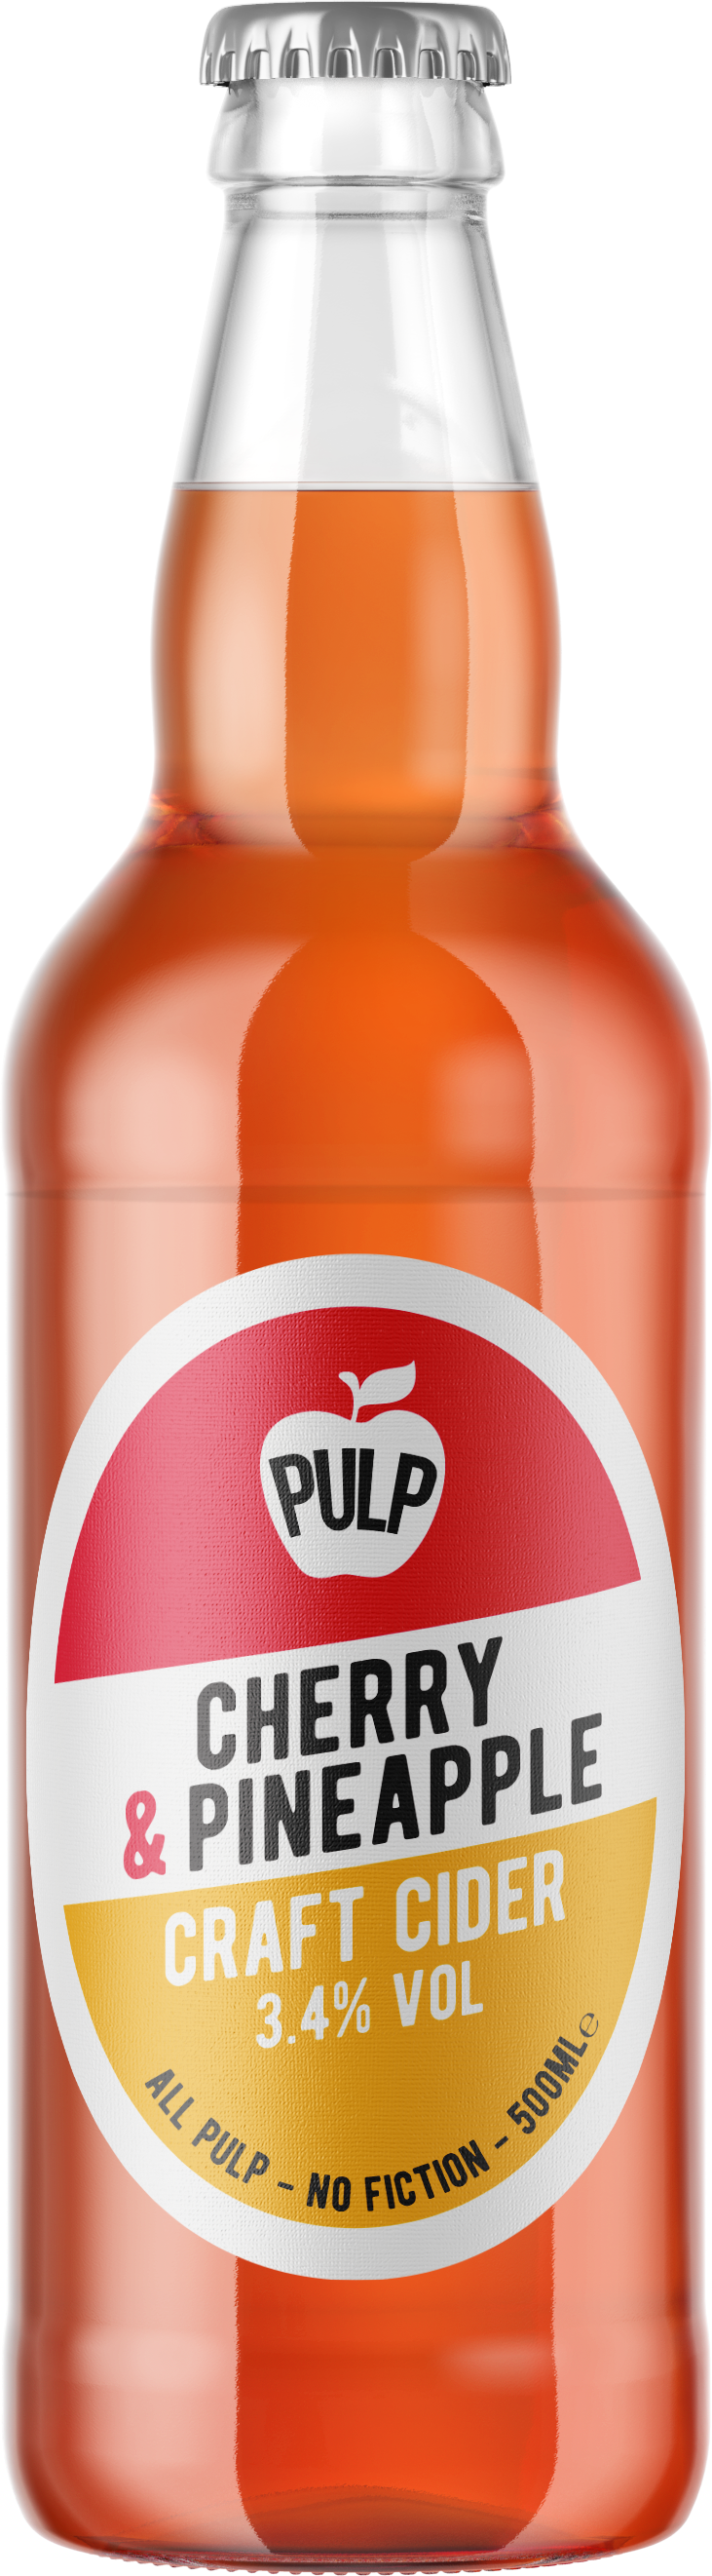 PULP Cherry and Pineapple 3.4% 12 x 500ml Bottles